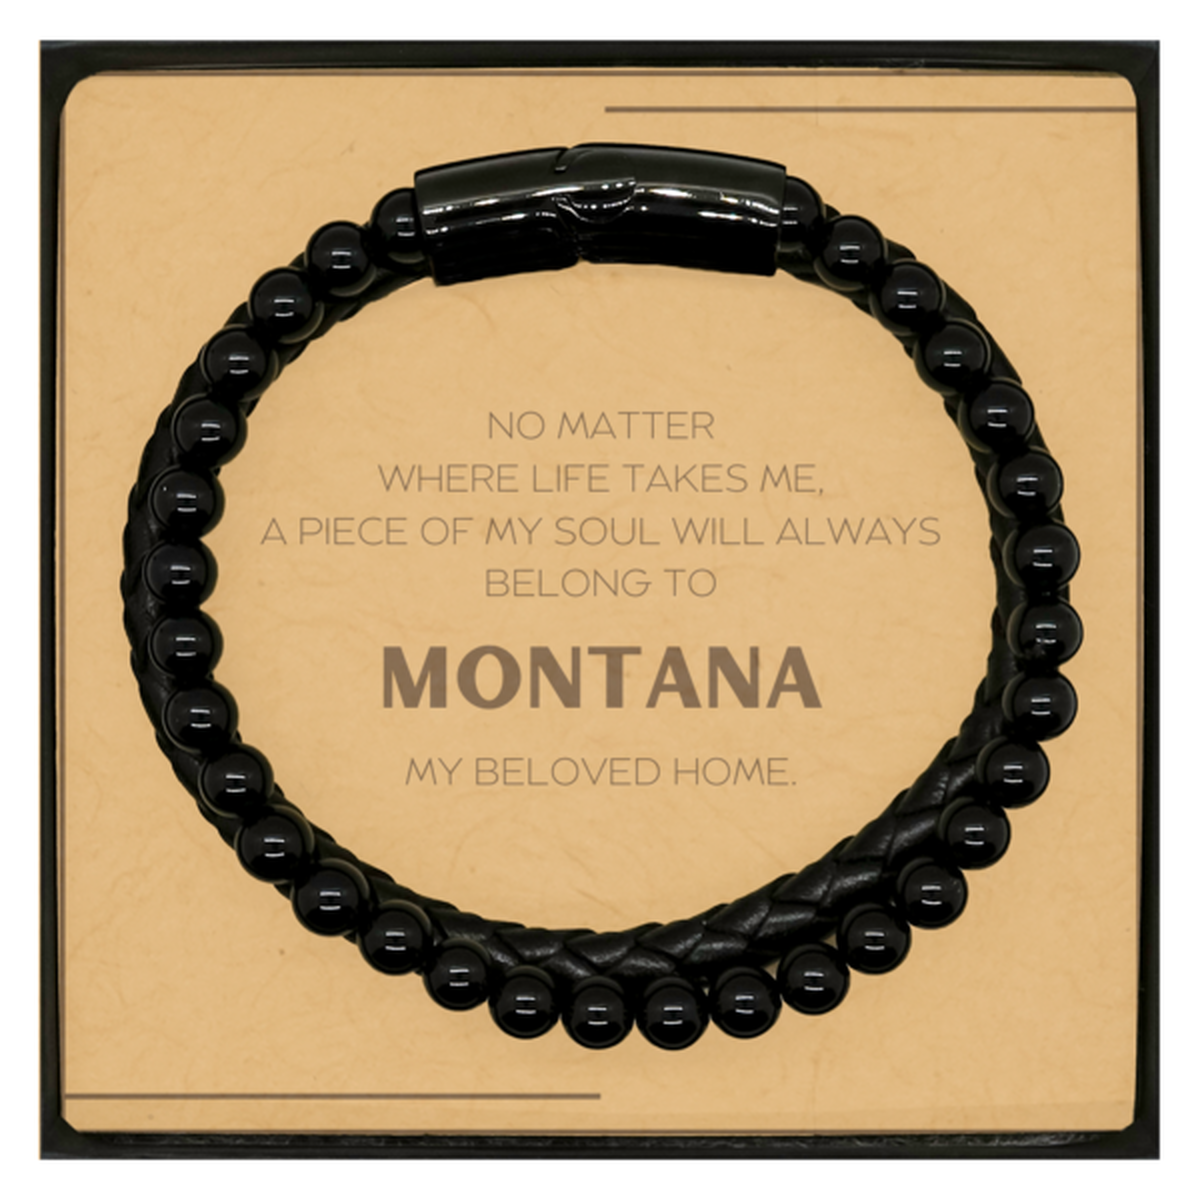 Love Montana State Gifts, My soul will always belong to Montana, Proud Stone Leather Bracelets, Birthday Christmas Unique Gifts For Montana Men, Women, Friends